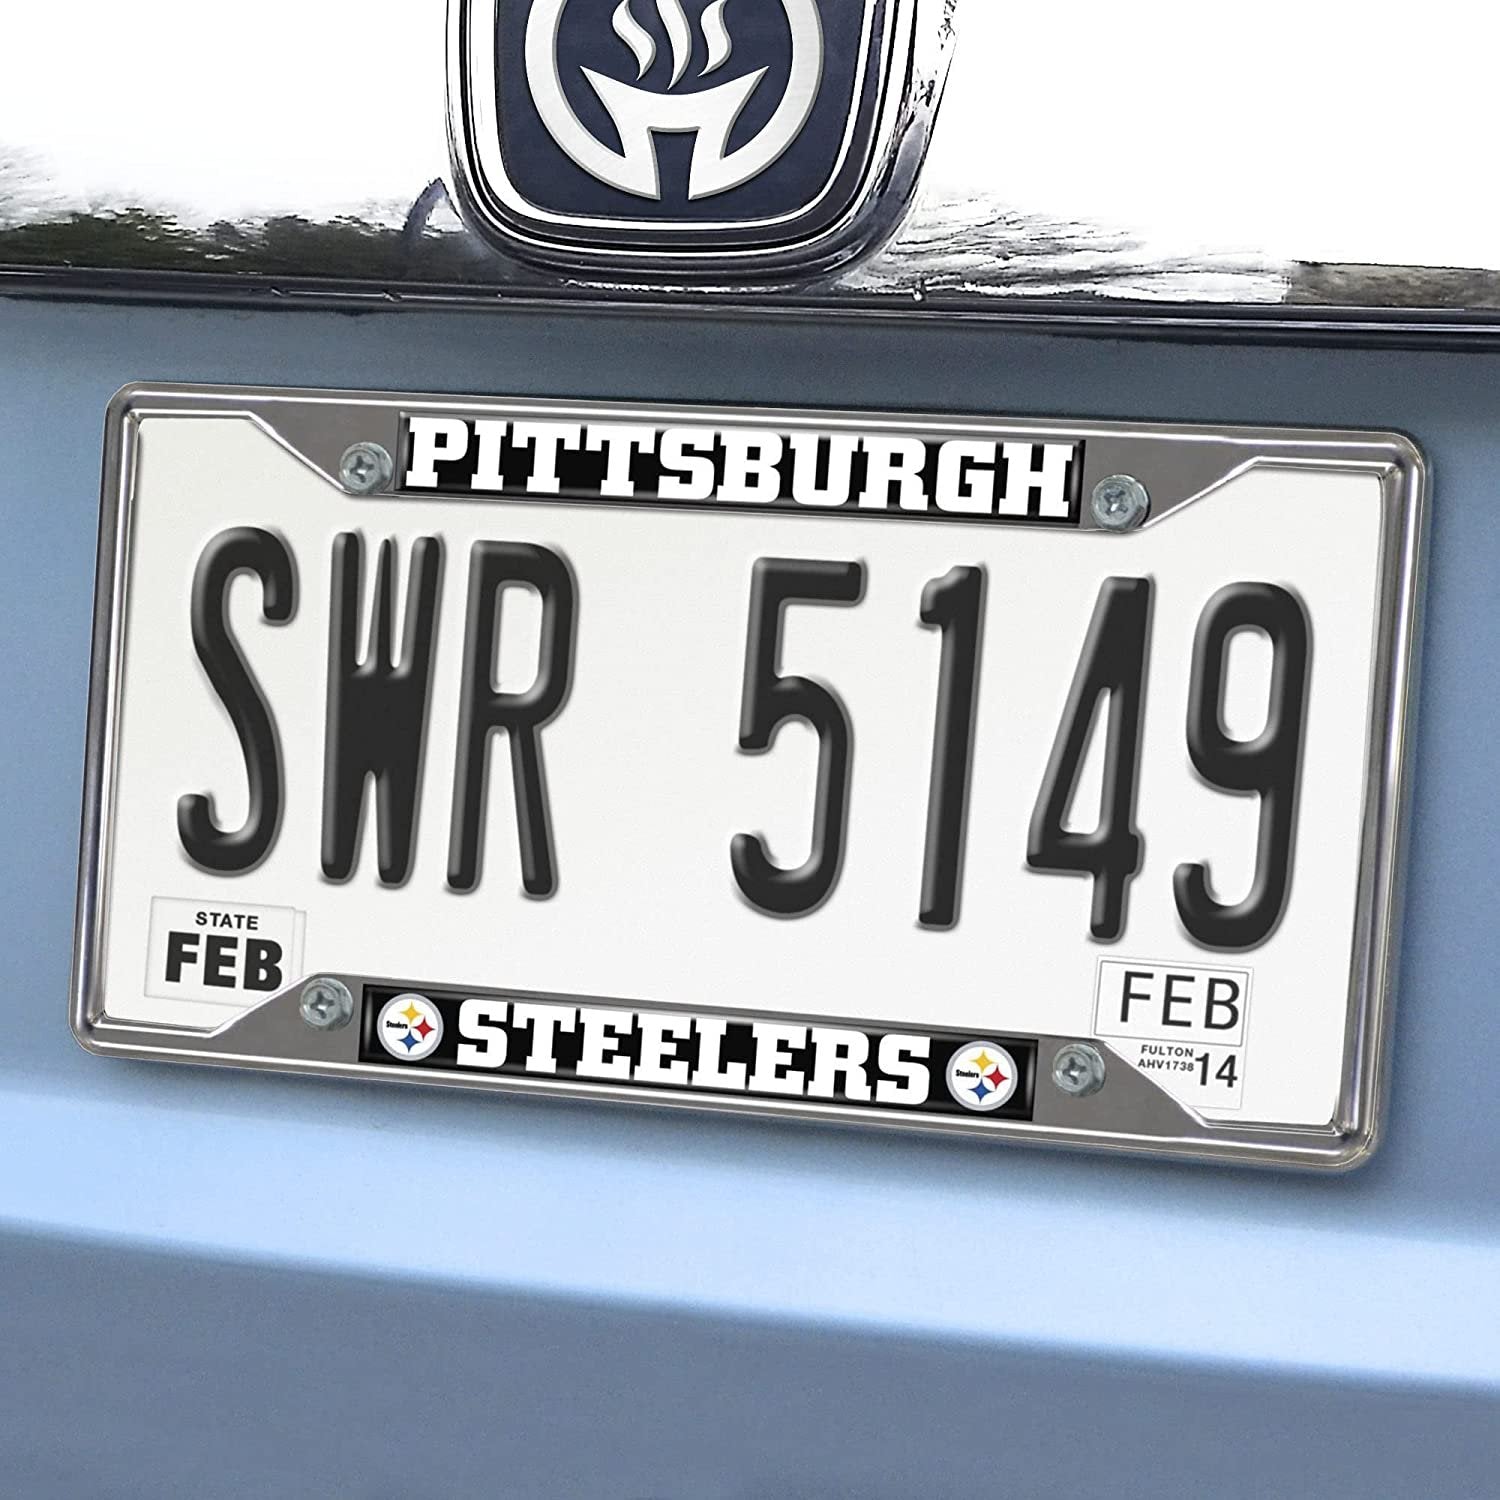 Pittsburgh Steelers Metal License Plate Frame Chrome Tag Cover 6x12 Inch